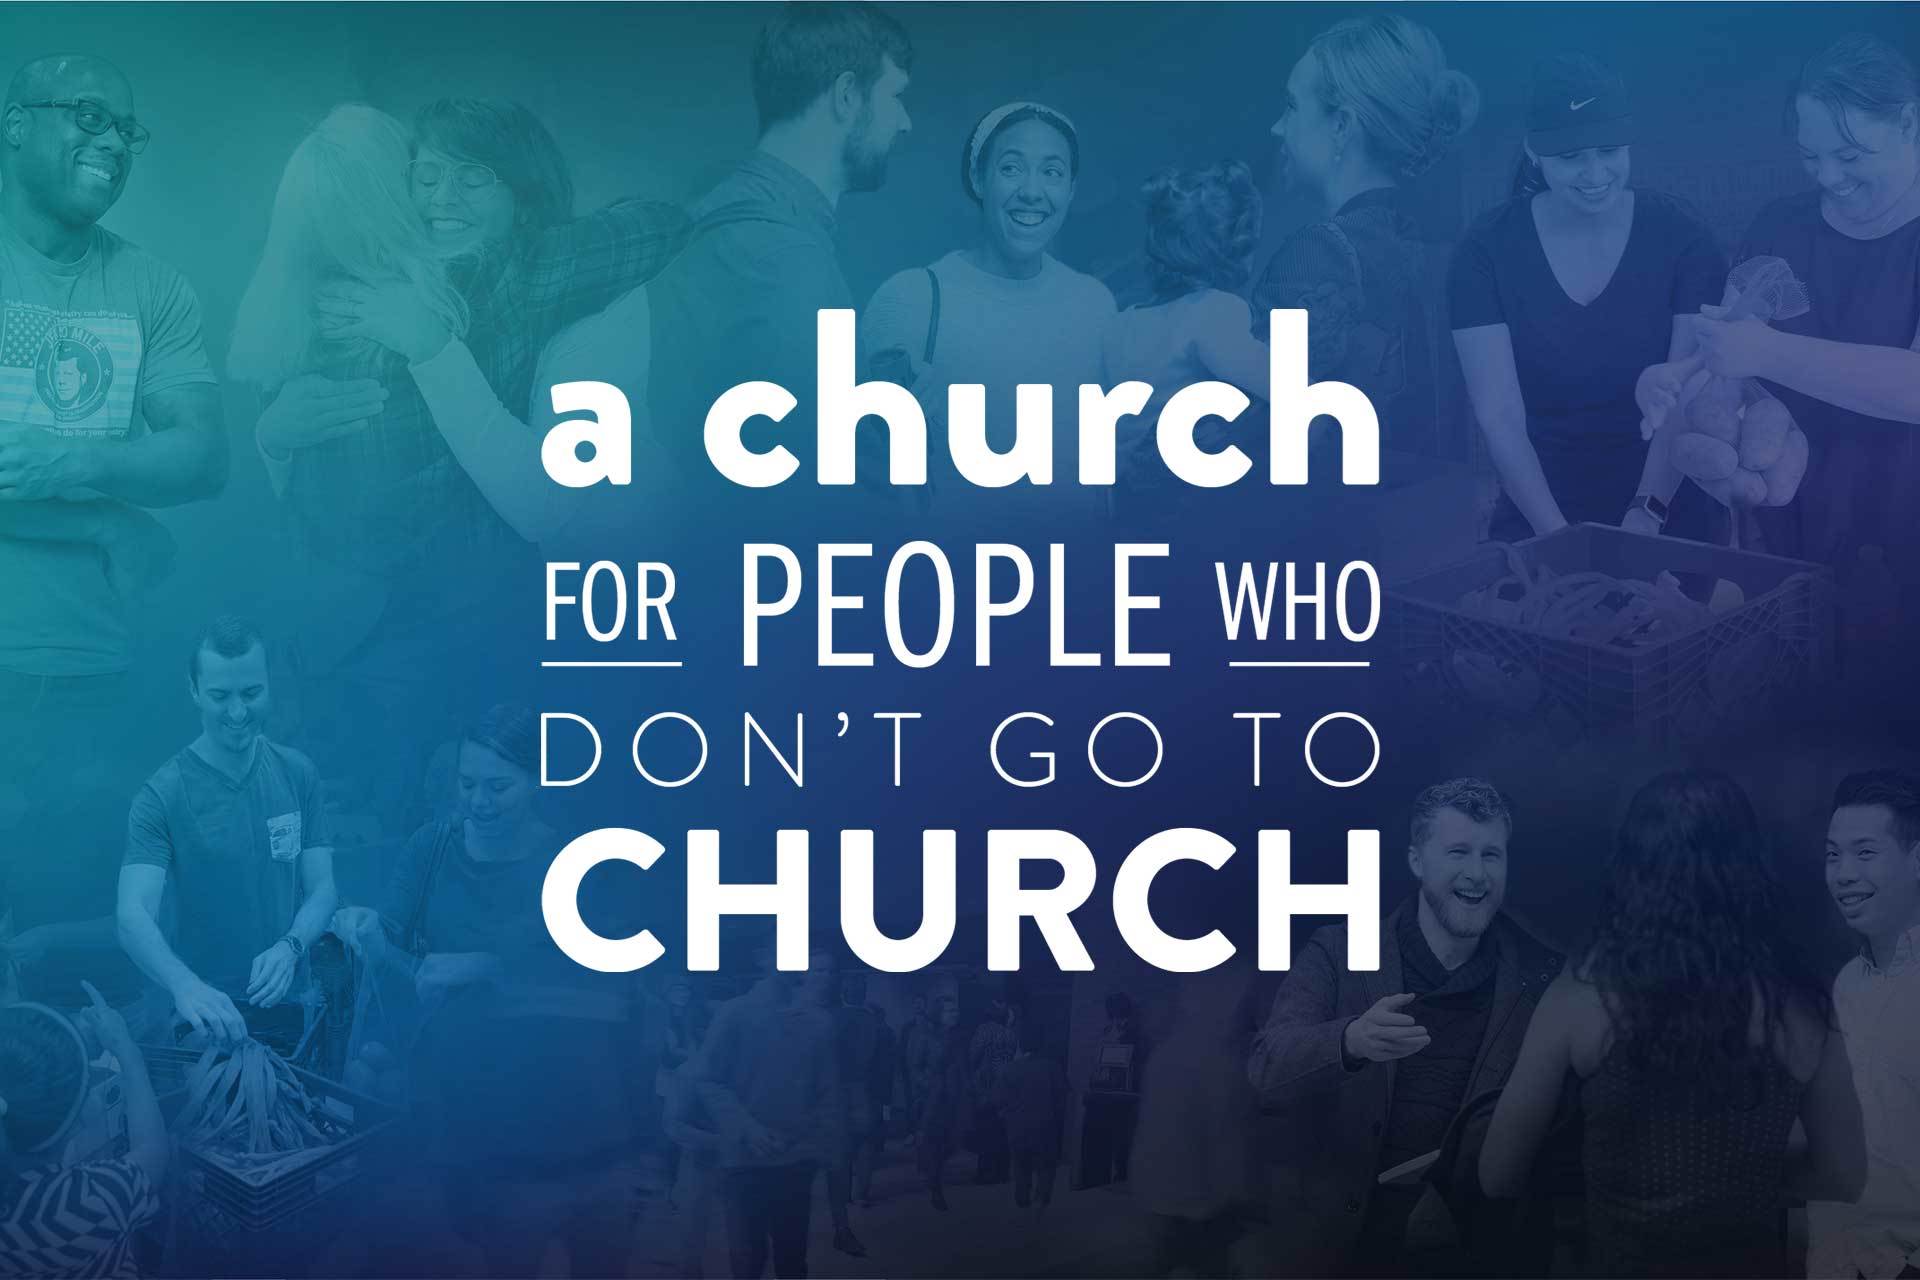 Link to A Church For People Who Don't Go To Church detail page